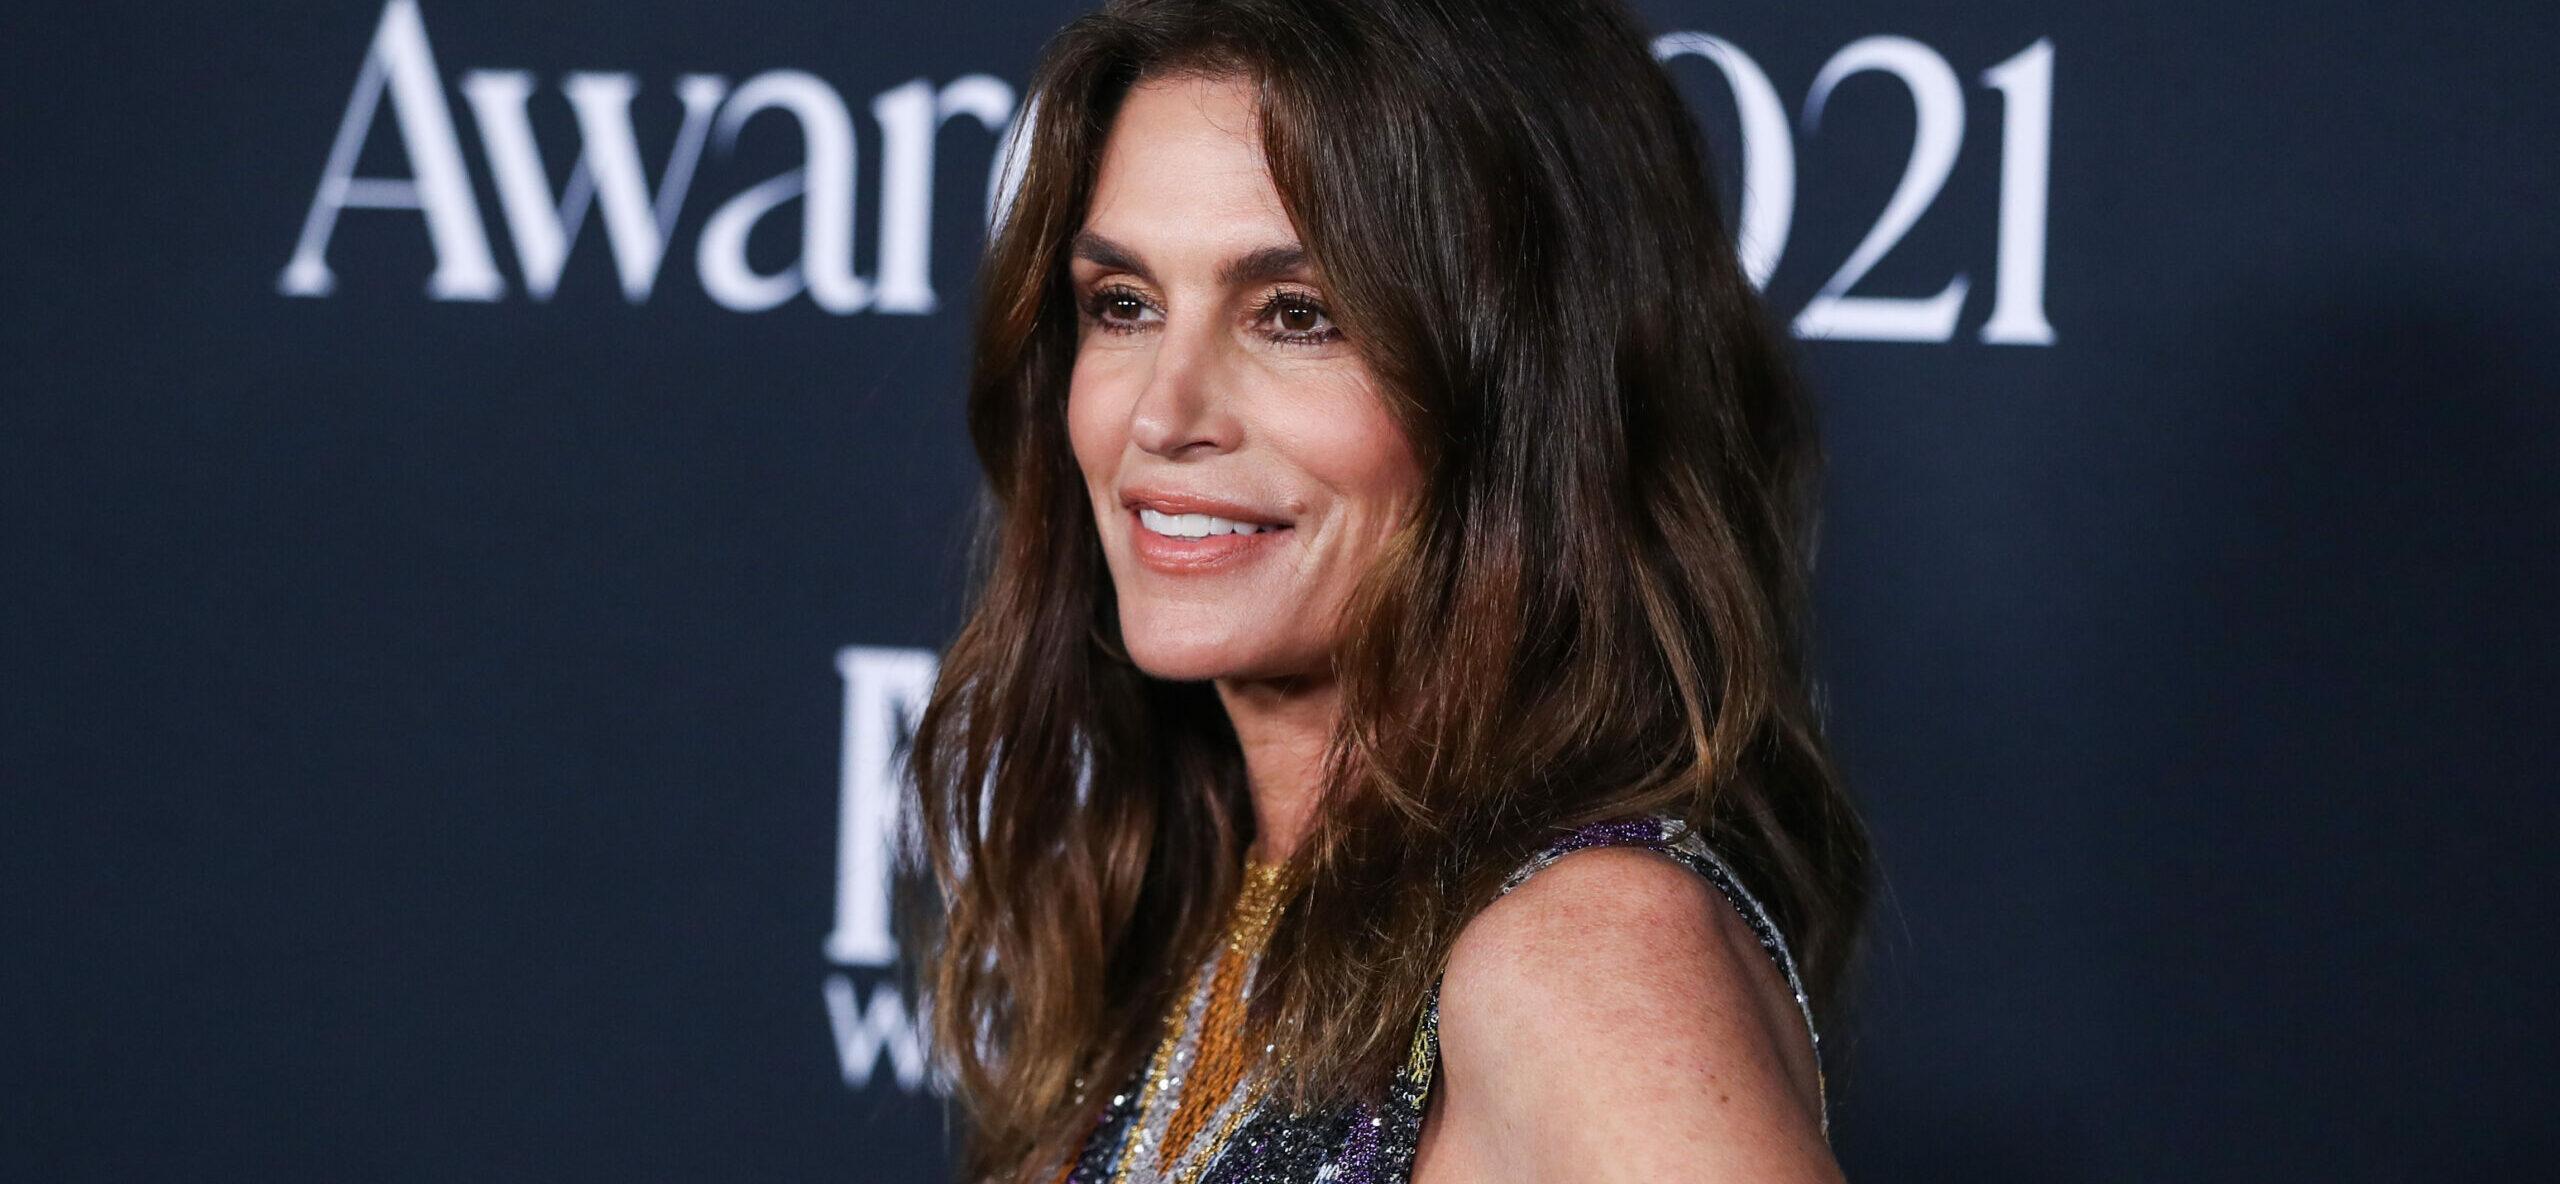 Cindy Crawford Files For Restraining Order Against 'Stalker' Claiming To Have Her Child